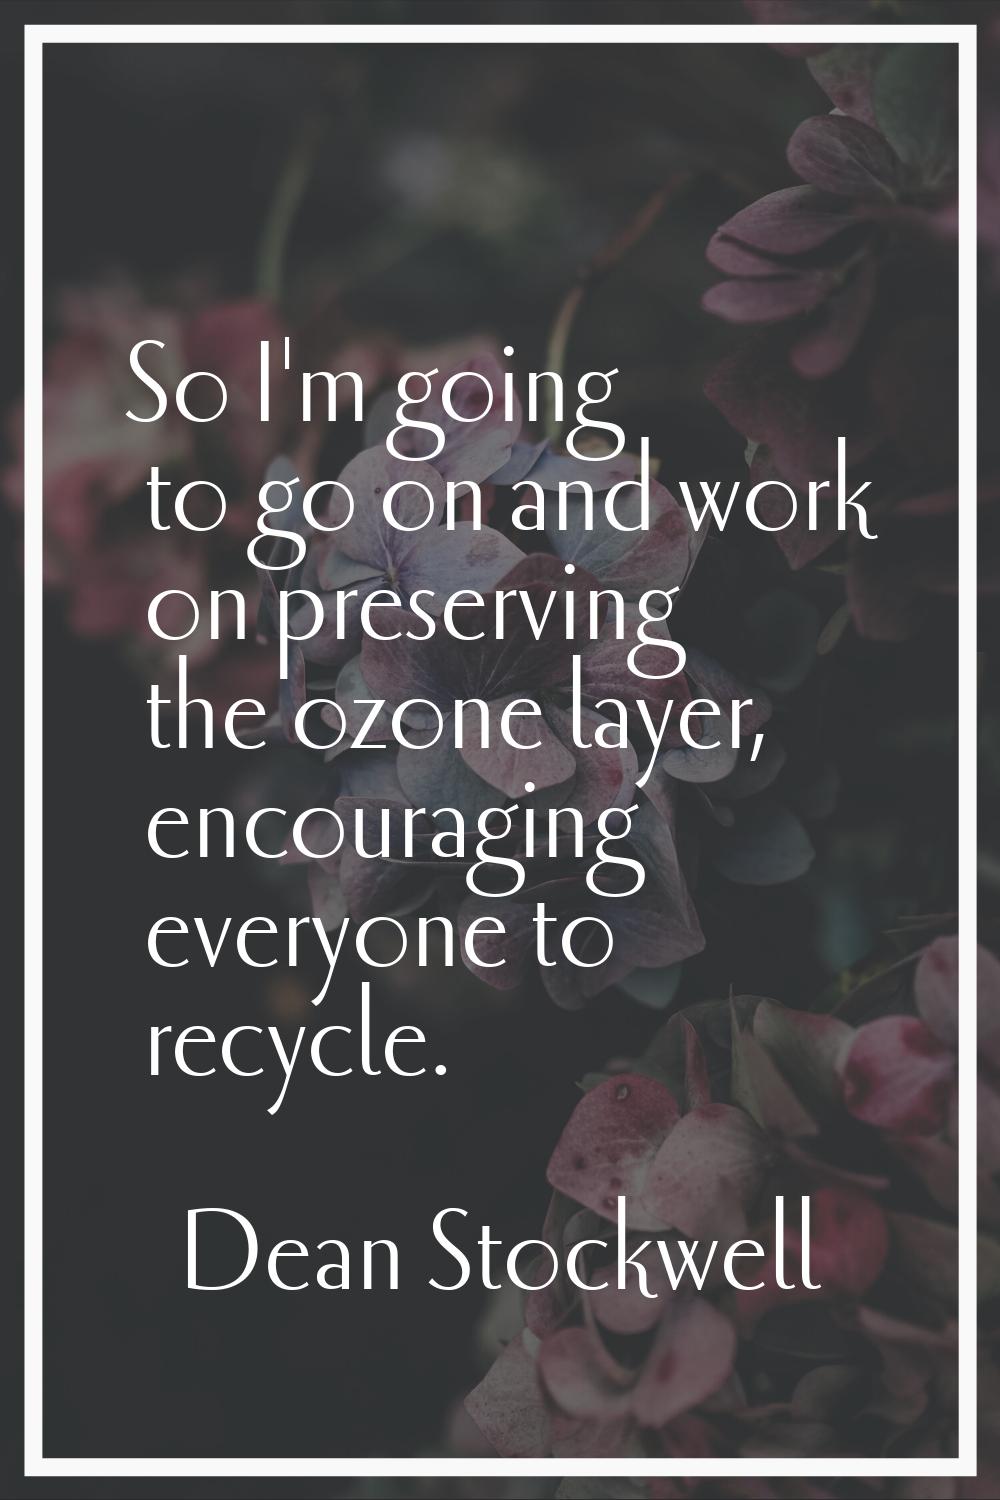 So I'm going to go on and work on preserving the ozone layer, encouraging everyone to recycle.